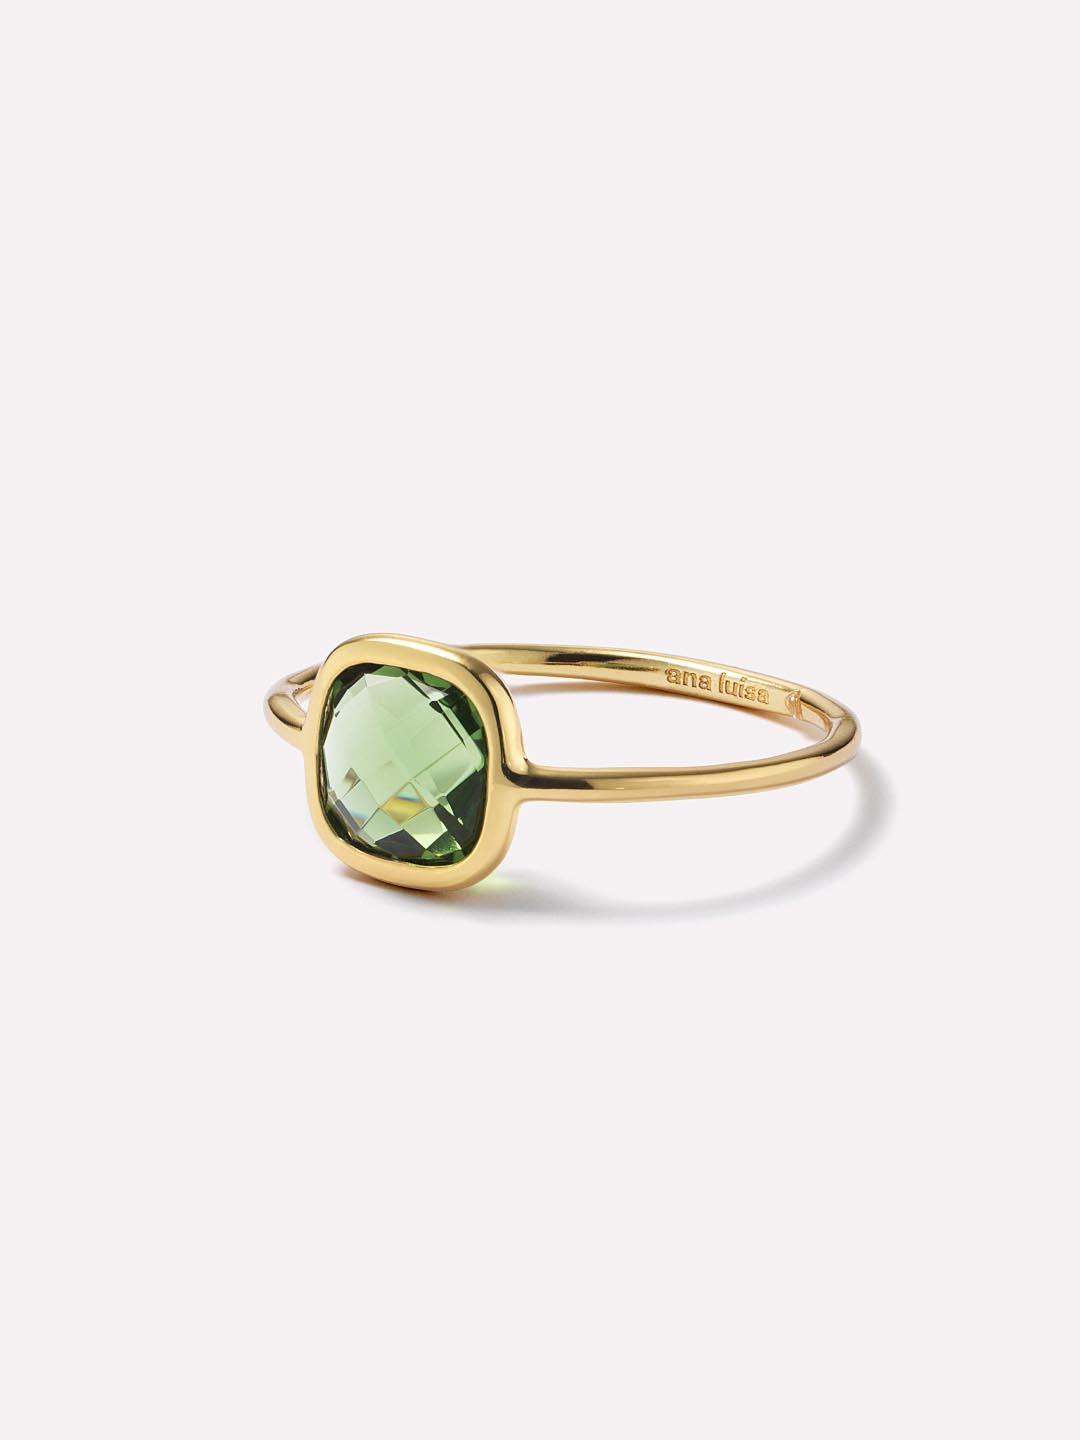 Panchaloha/Impon Pearl/Green stone ring for Men and Women